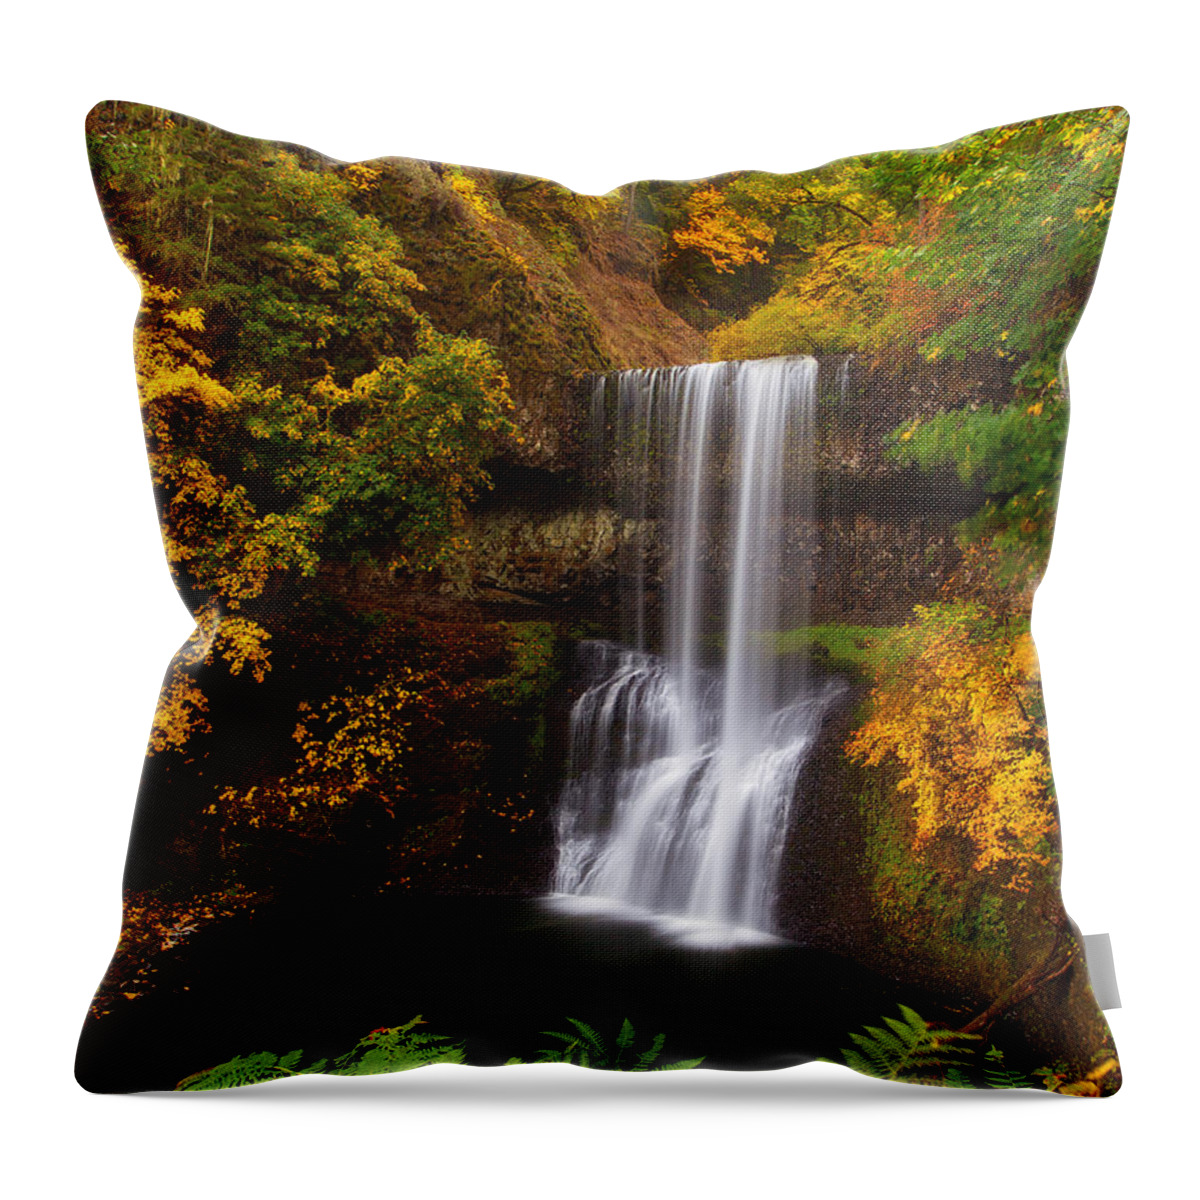 Waterfall Throw Pillow featuring the photograph Surrounded By Fall by Darren White